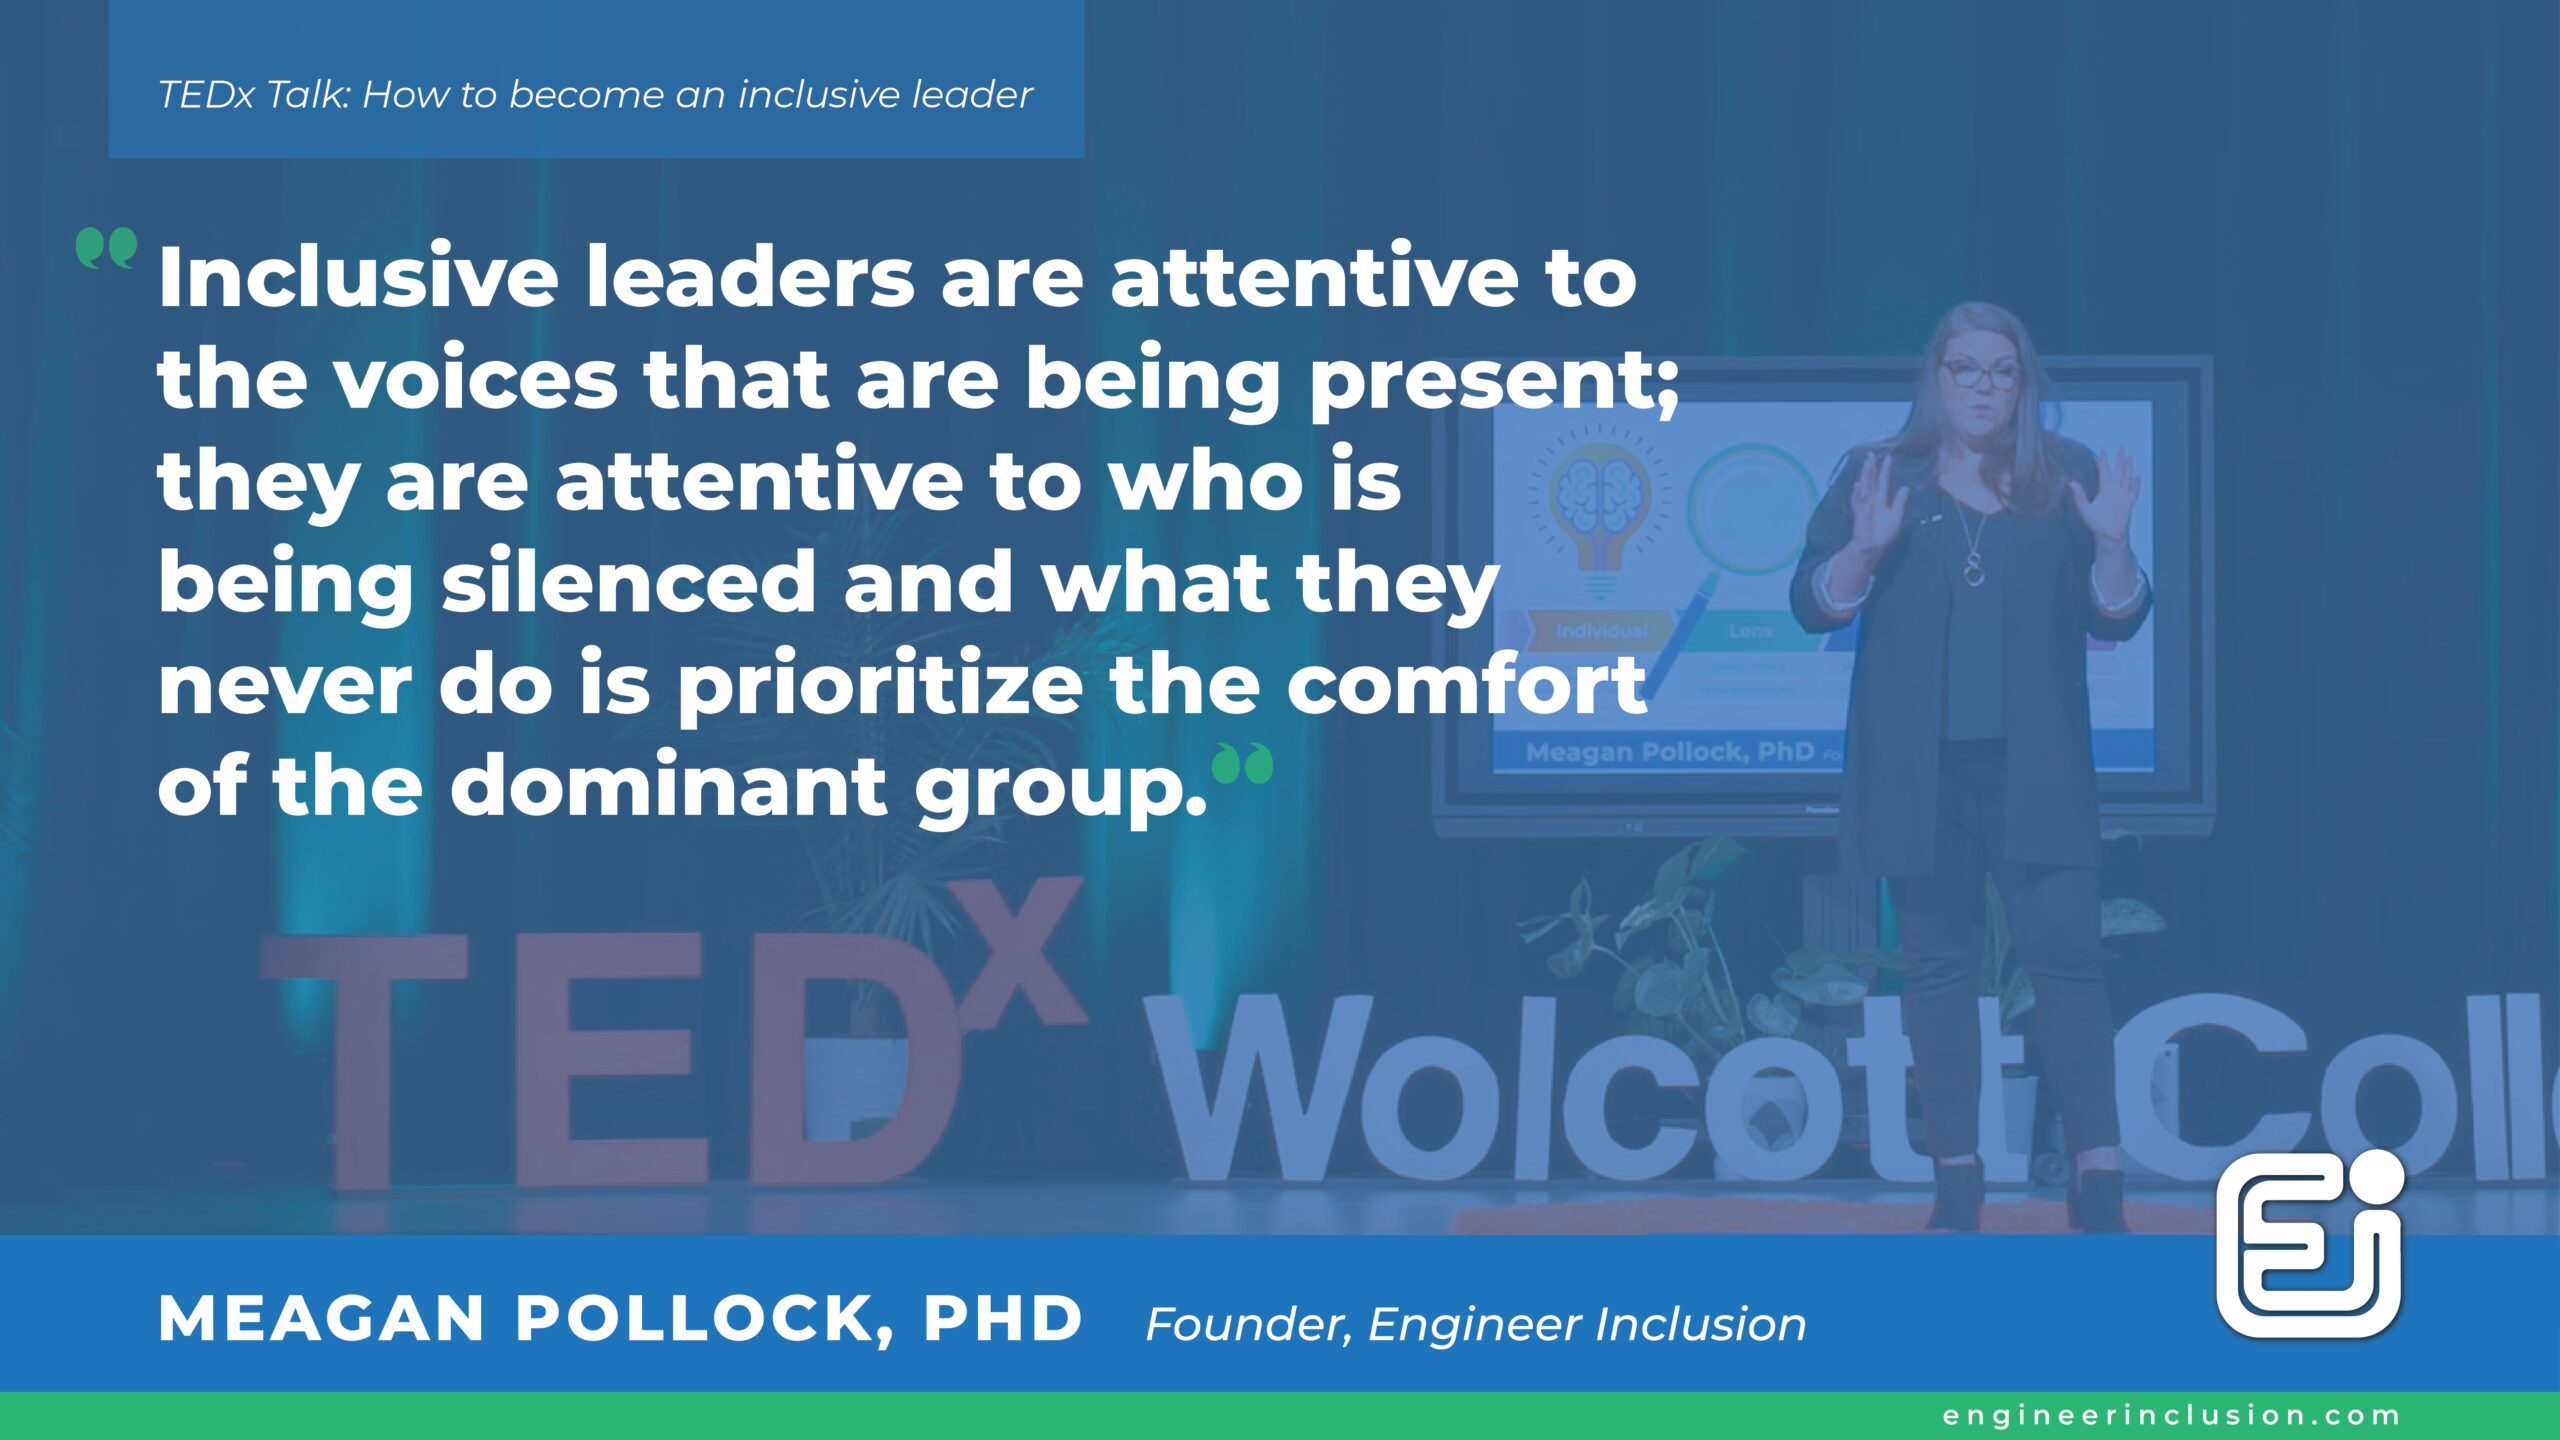 Inclusive leaders are attentive to the voices that are being present; they are attentive to who is being silenced and what they never do is prioritize the comfort of the dominant group. Dr. Meagan Pollock